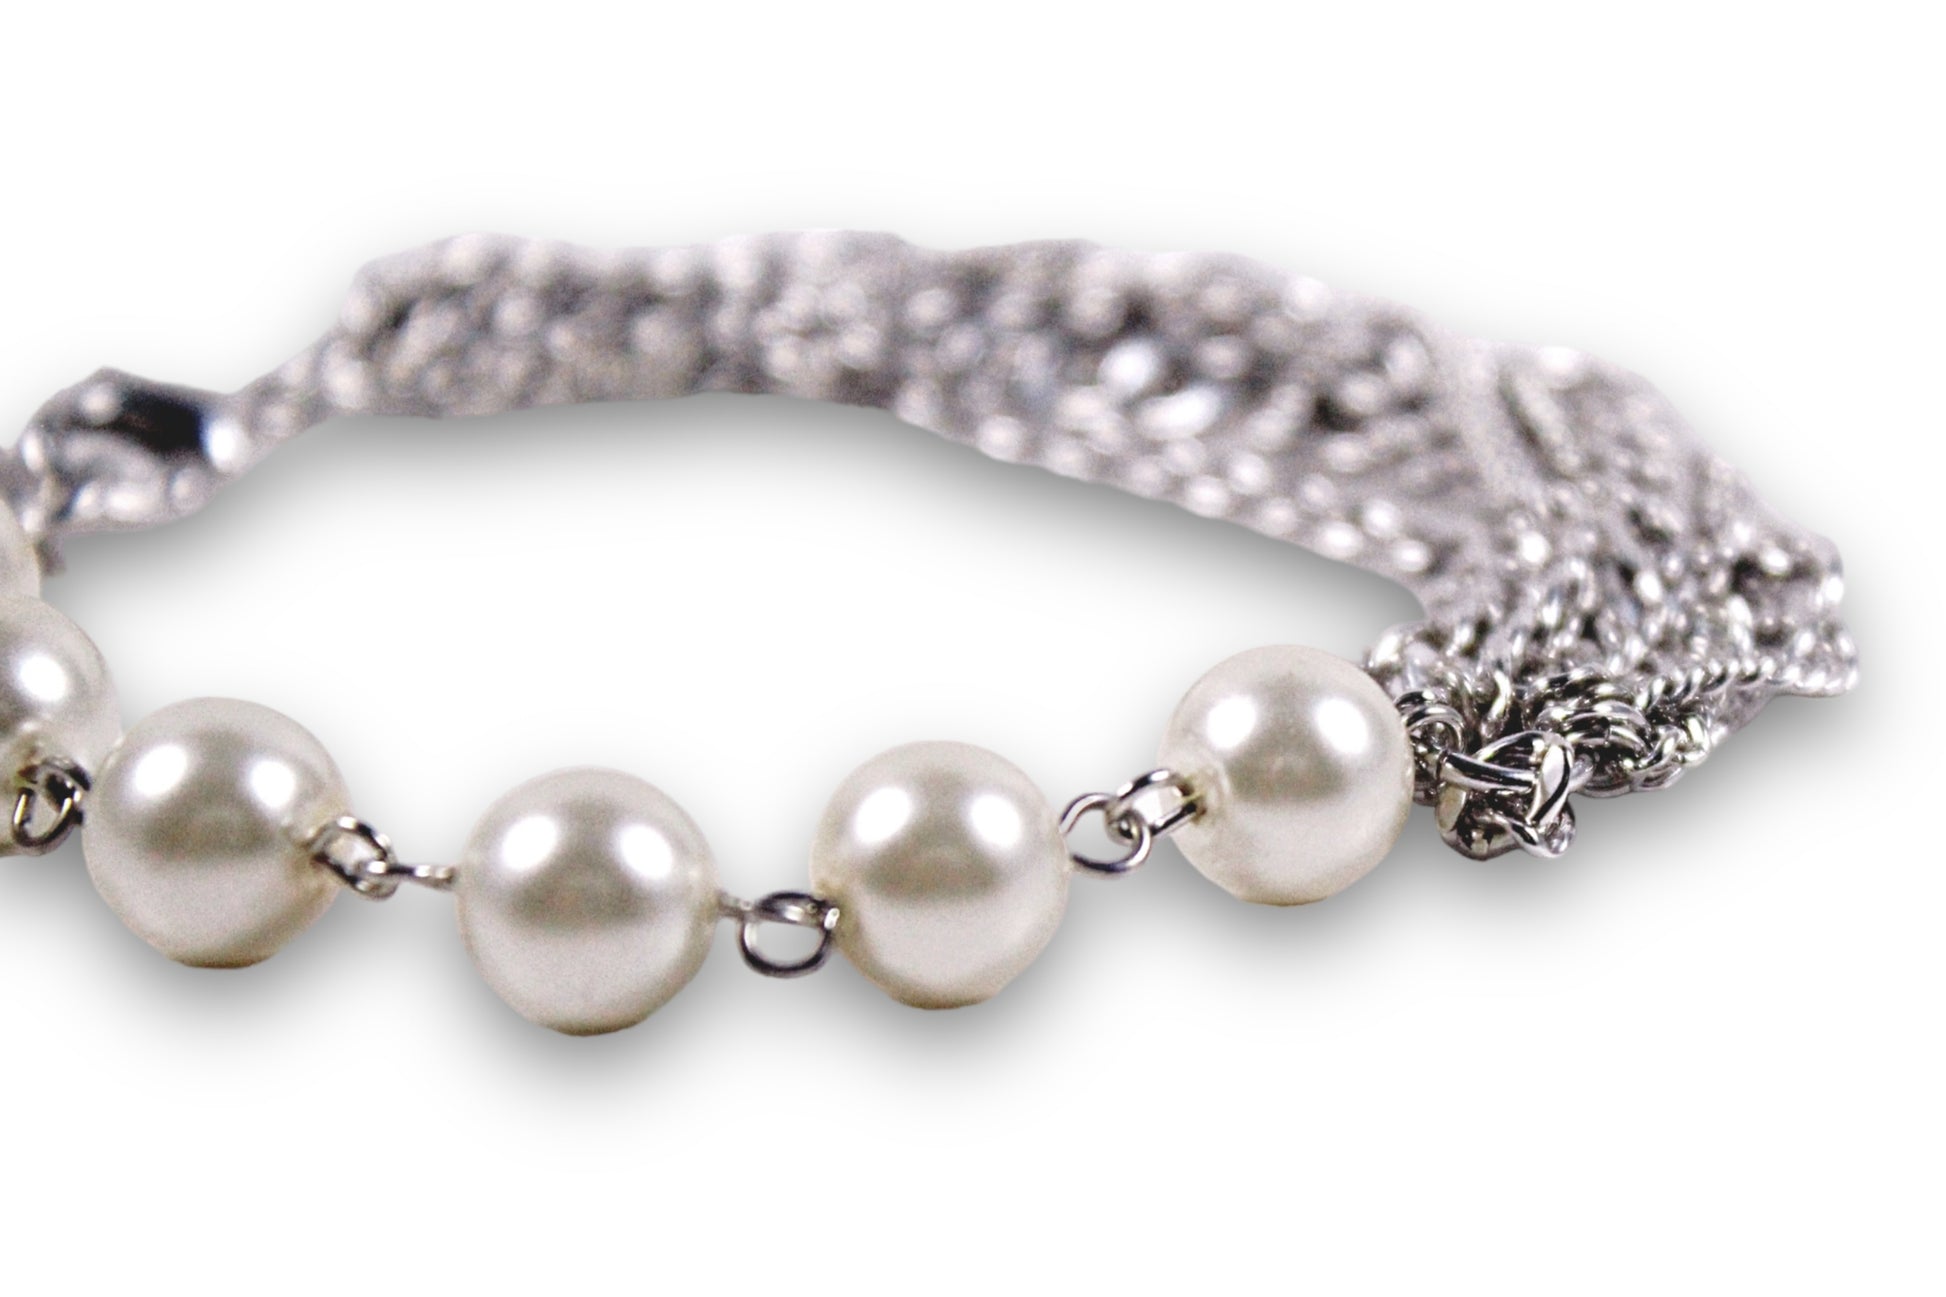 Pearl Bracelet Silver Chain Bracelet Pearl Beaded Bracelets Dainty Charm Bracelet Minimalist Wedding Jewelry Simple Bridesmaid Gift, KAI  BRACELET for Her, for Bride, for Bridesmaid Gift , for Mother of the Bride, for Wedding Guest or Special Occasion by Camilla Christine Bridal Jewelry and Wedding Accessories. Bridal Style Inspiration Trends for Bride, Wedding Ideas